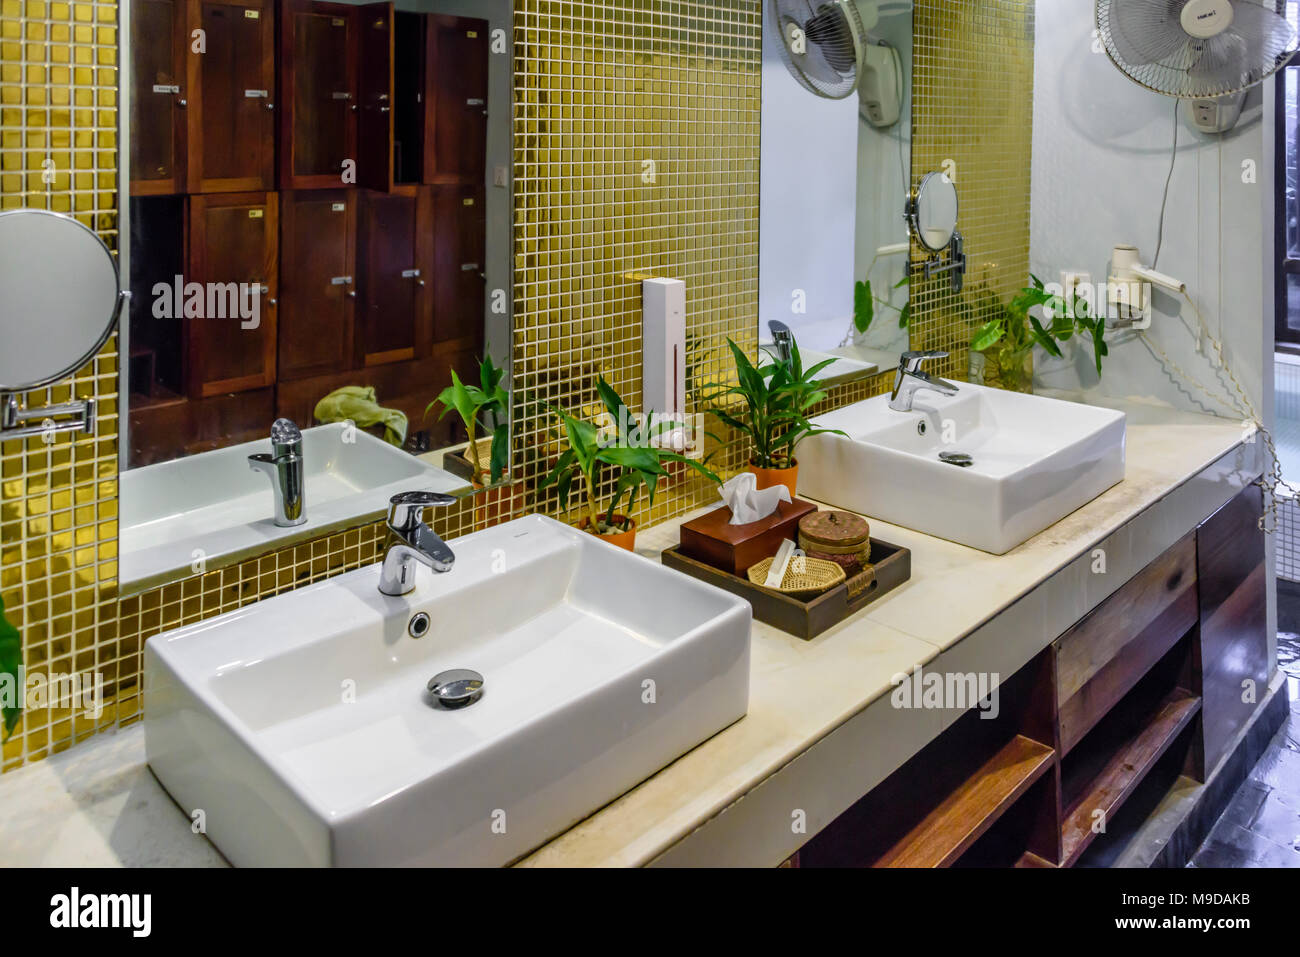 Sinks Mirrors And Glass Wall Tiles In The Changing Room Of